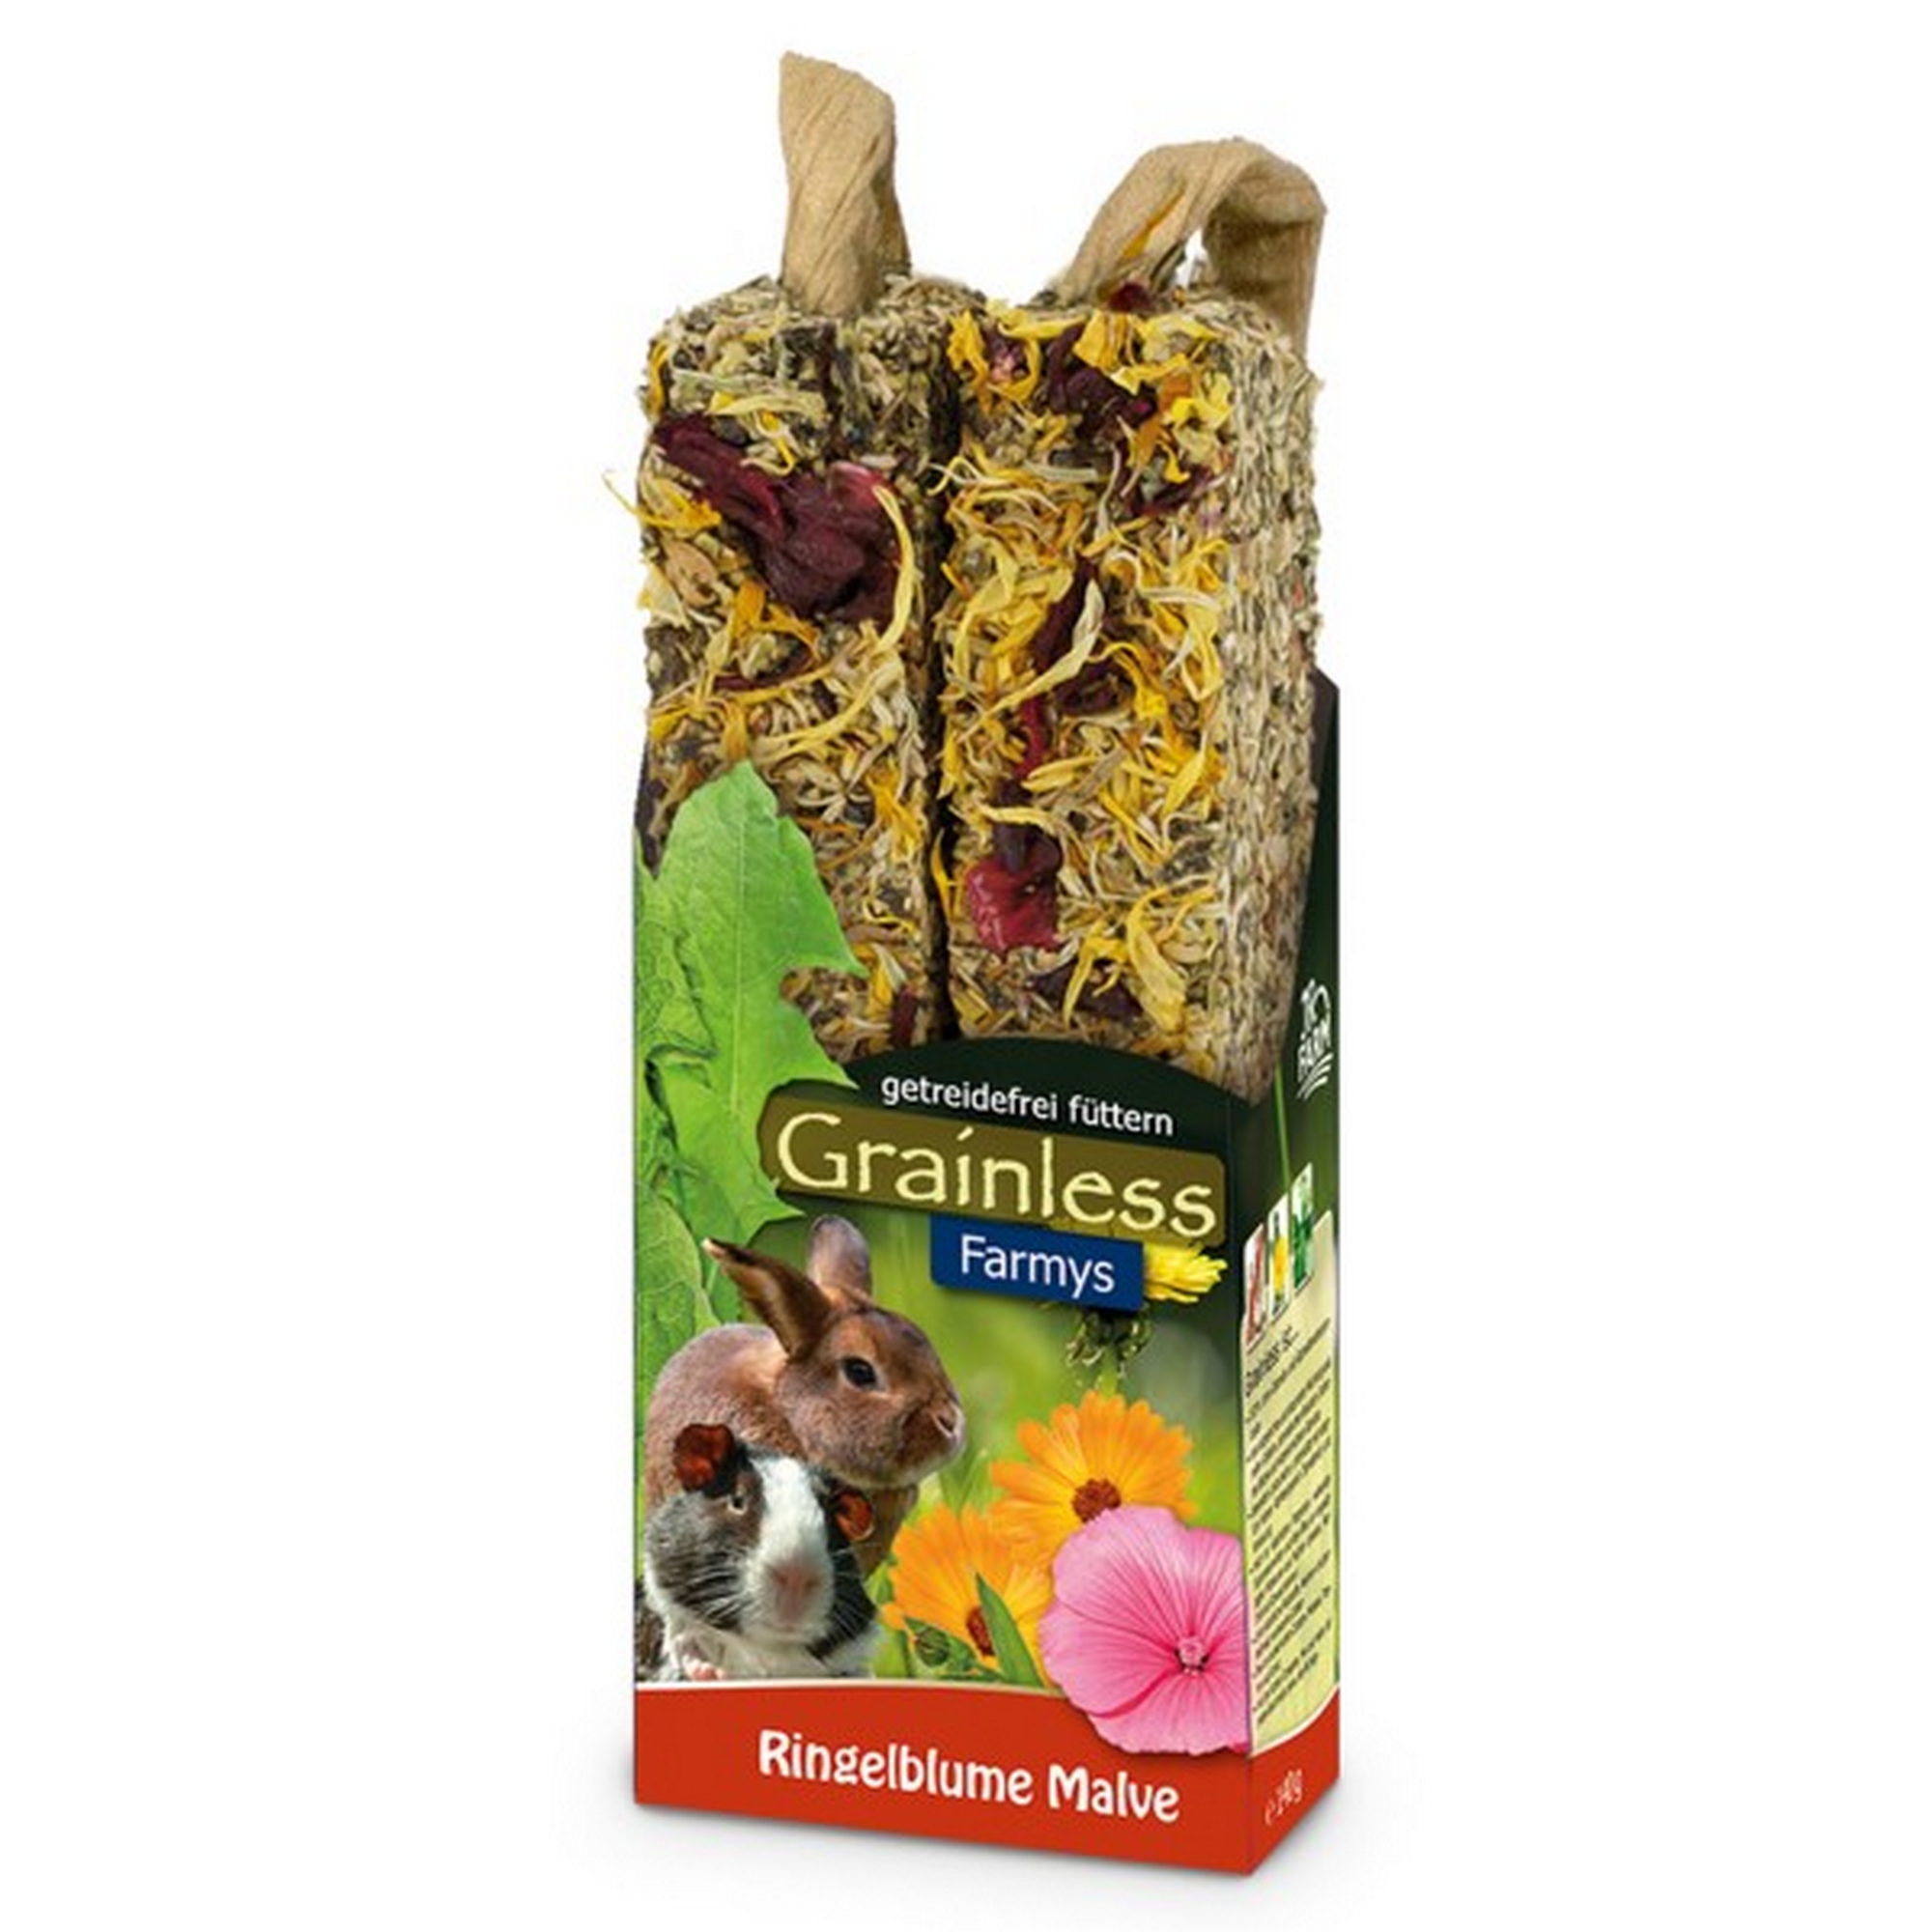 Nagersnack 'Grainless Farmys' Ringelblume-Malve 140 g + product picture